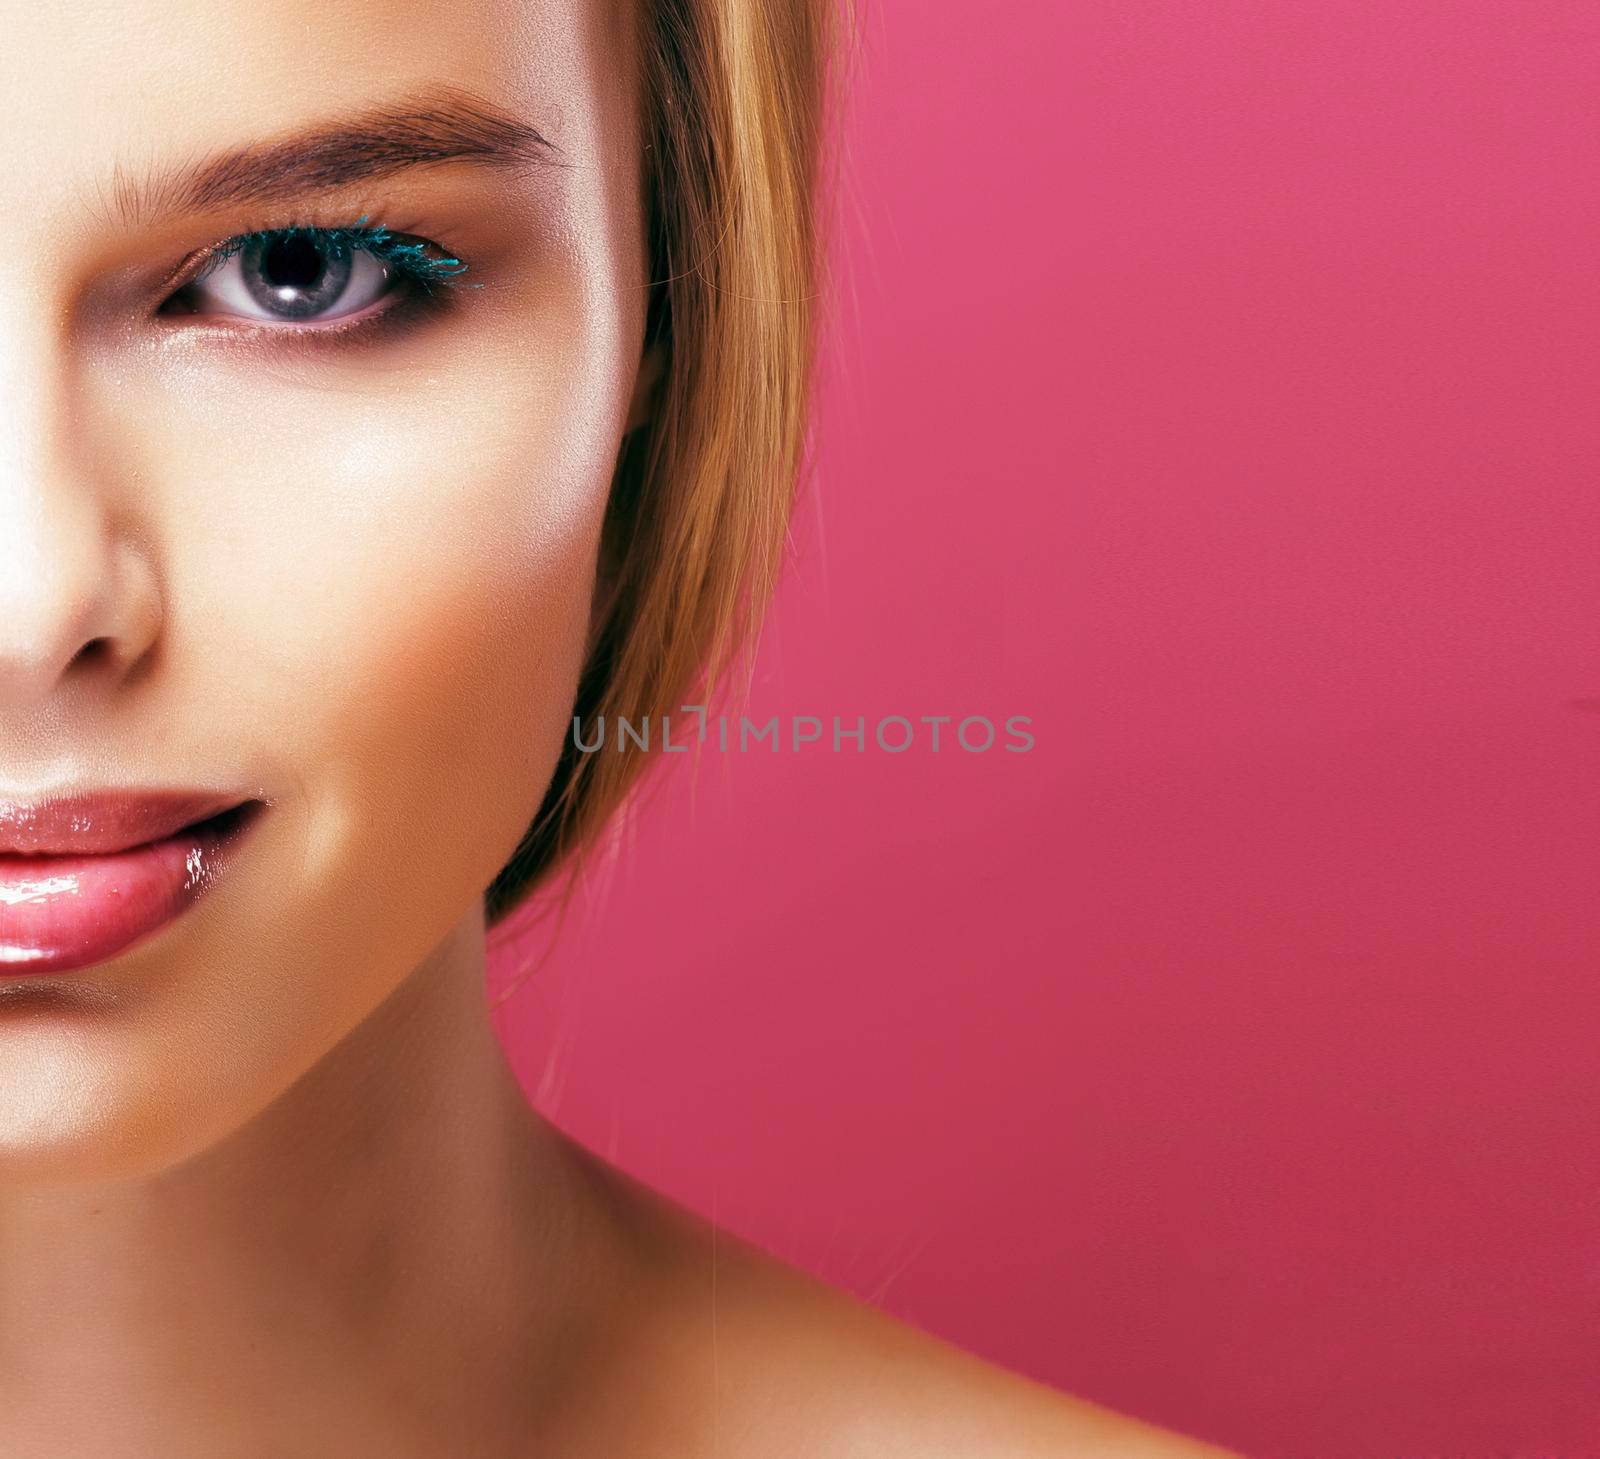 young pretty blonde real woman with hairstyle close up and makeup on pink background smiling close up